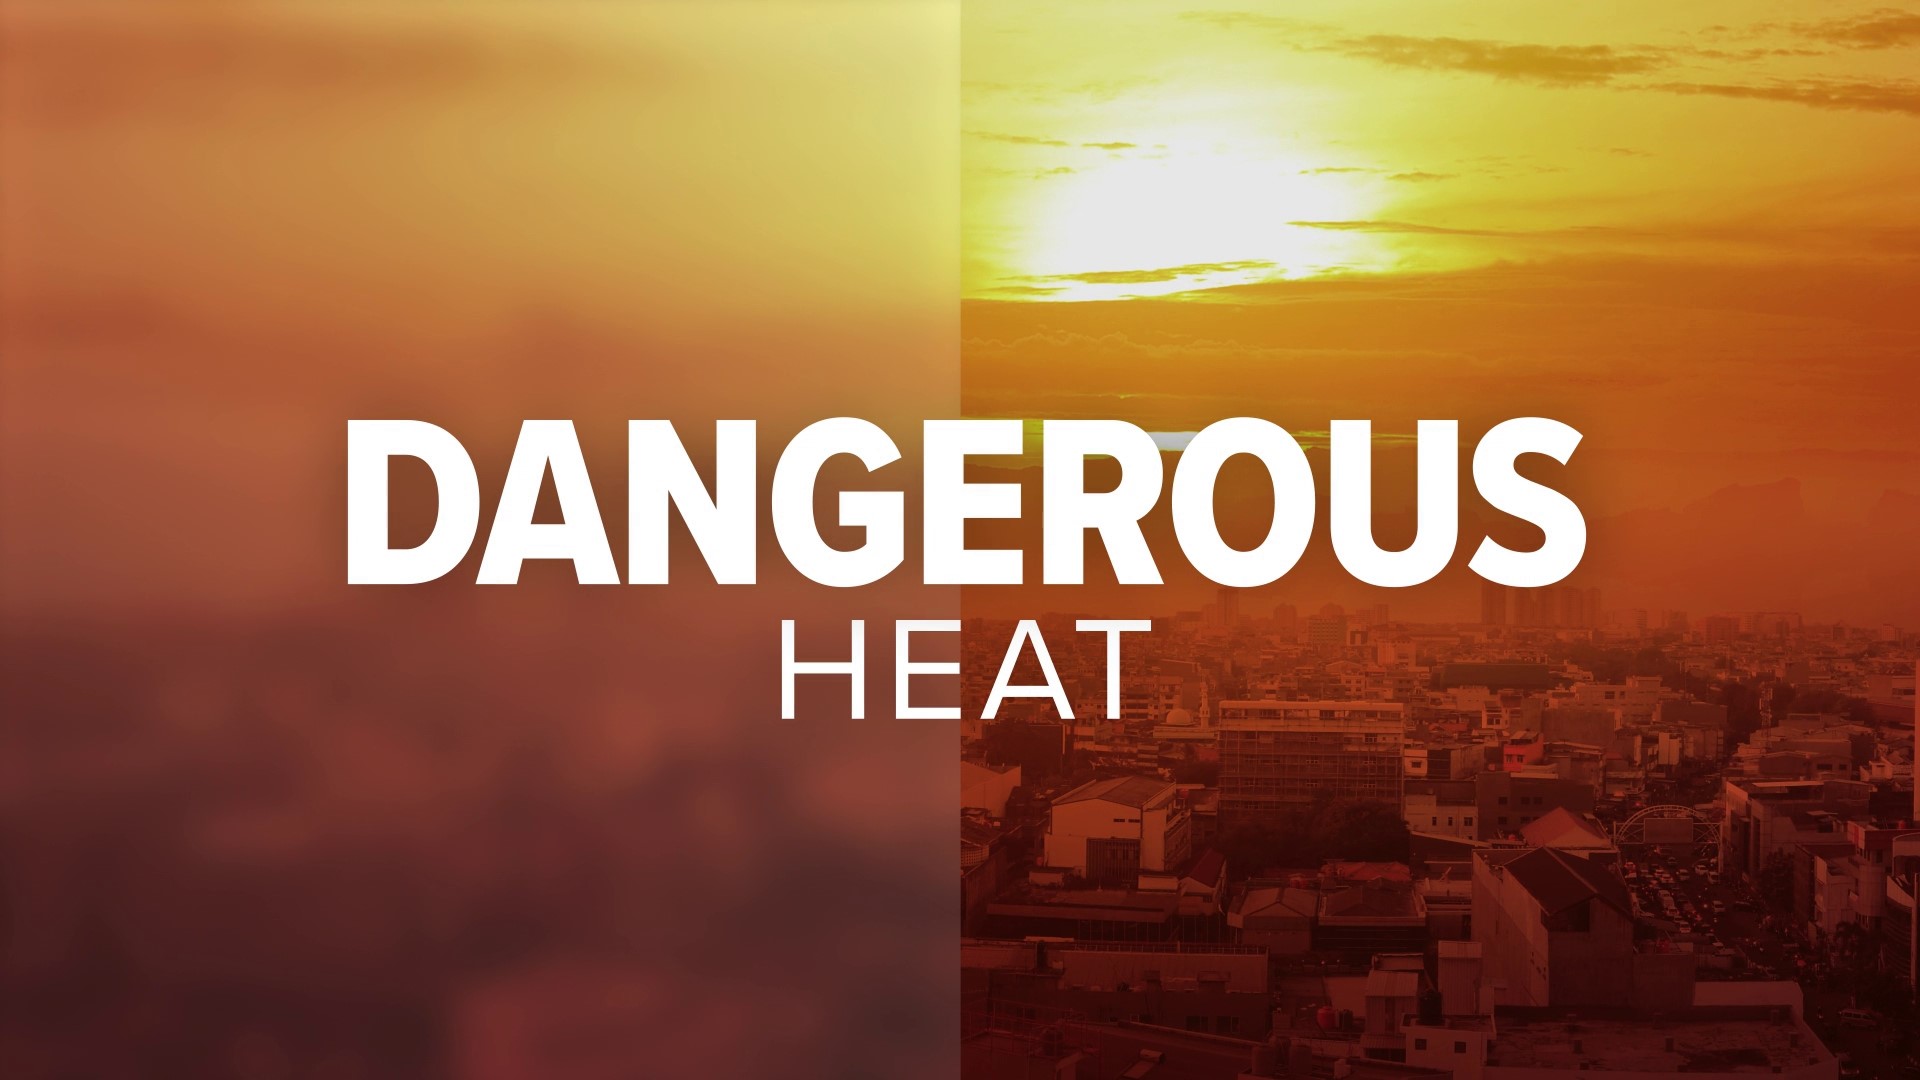 As we weather triple-digit feels-like temperatures, KHOU 11 is standing for Houston by keeping you informed and aware of how best to cope.